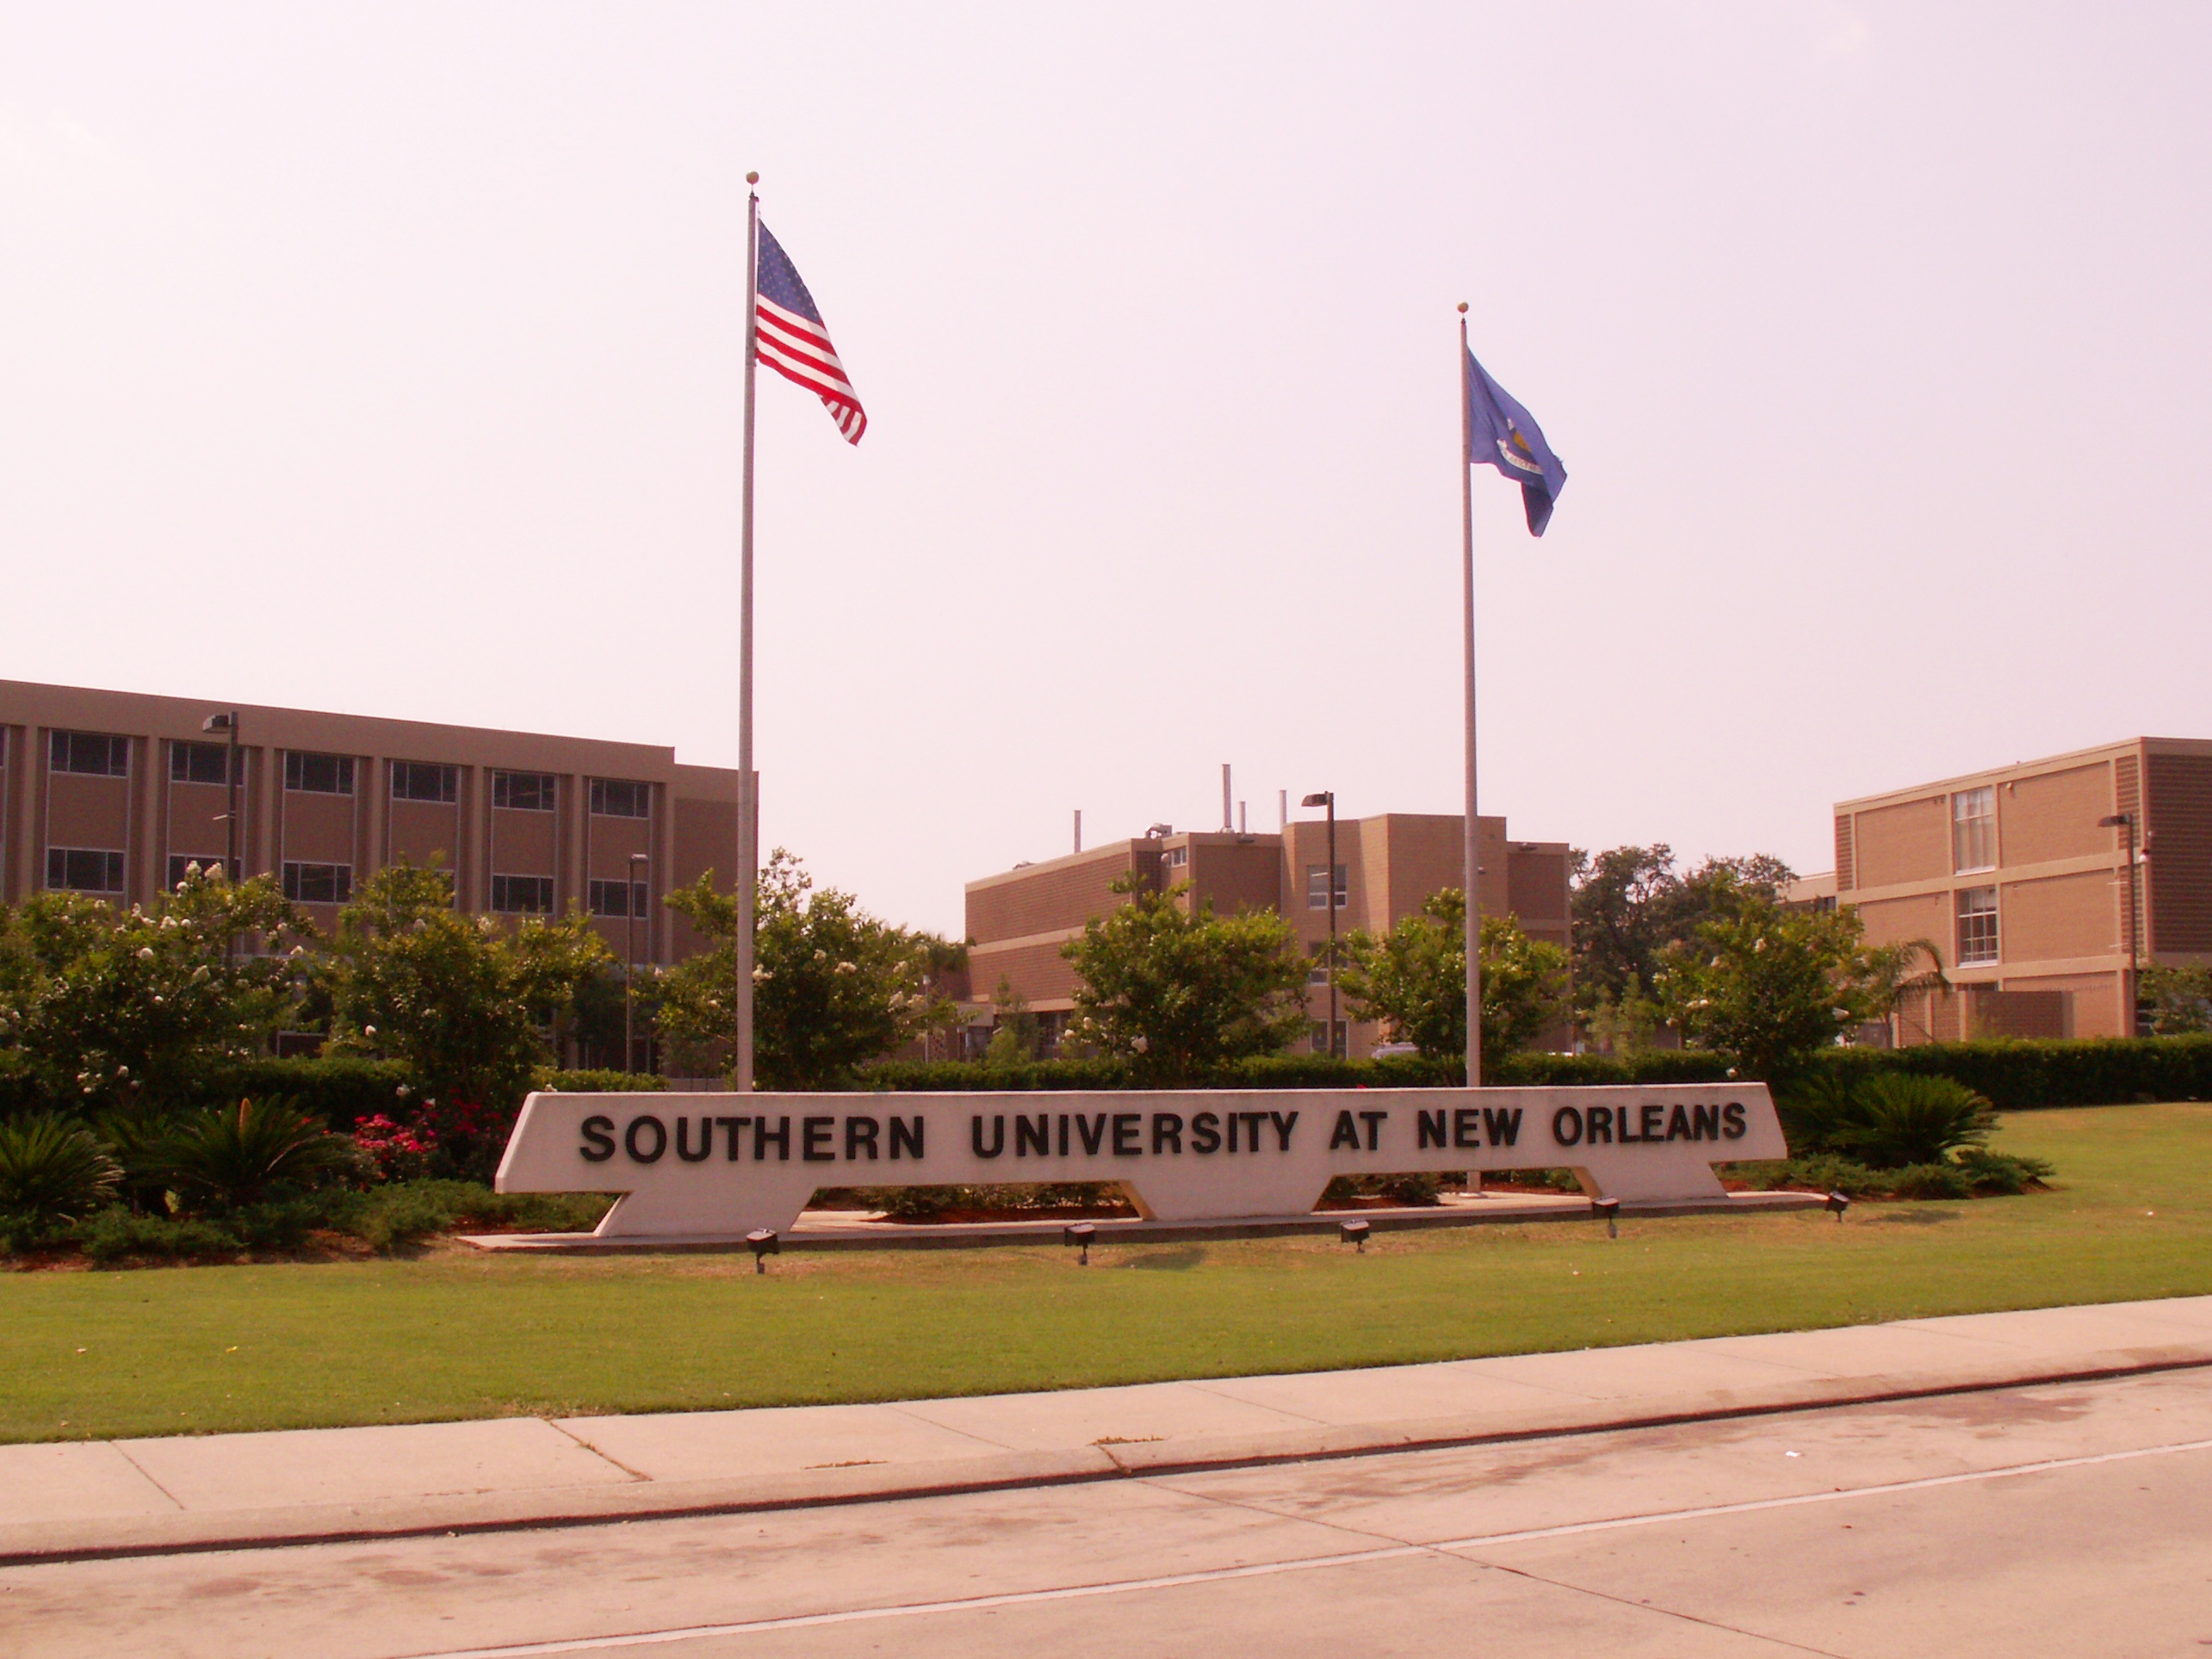 Southern University at New Orleans